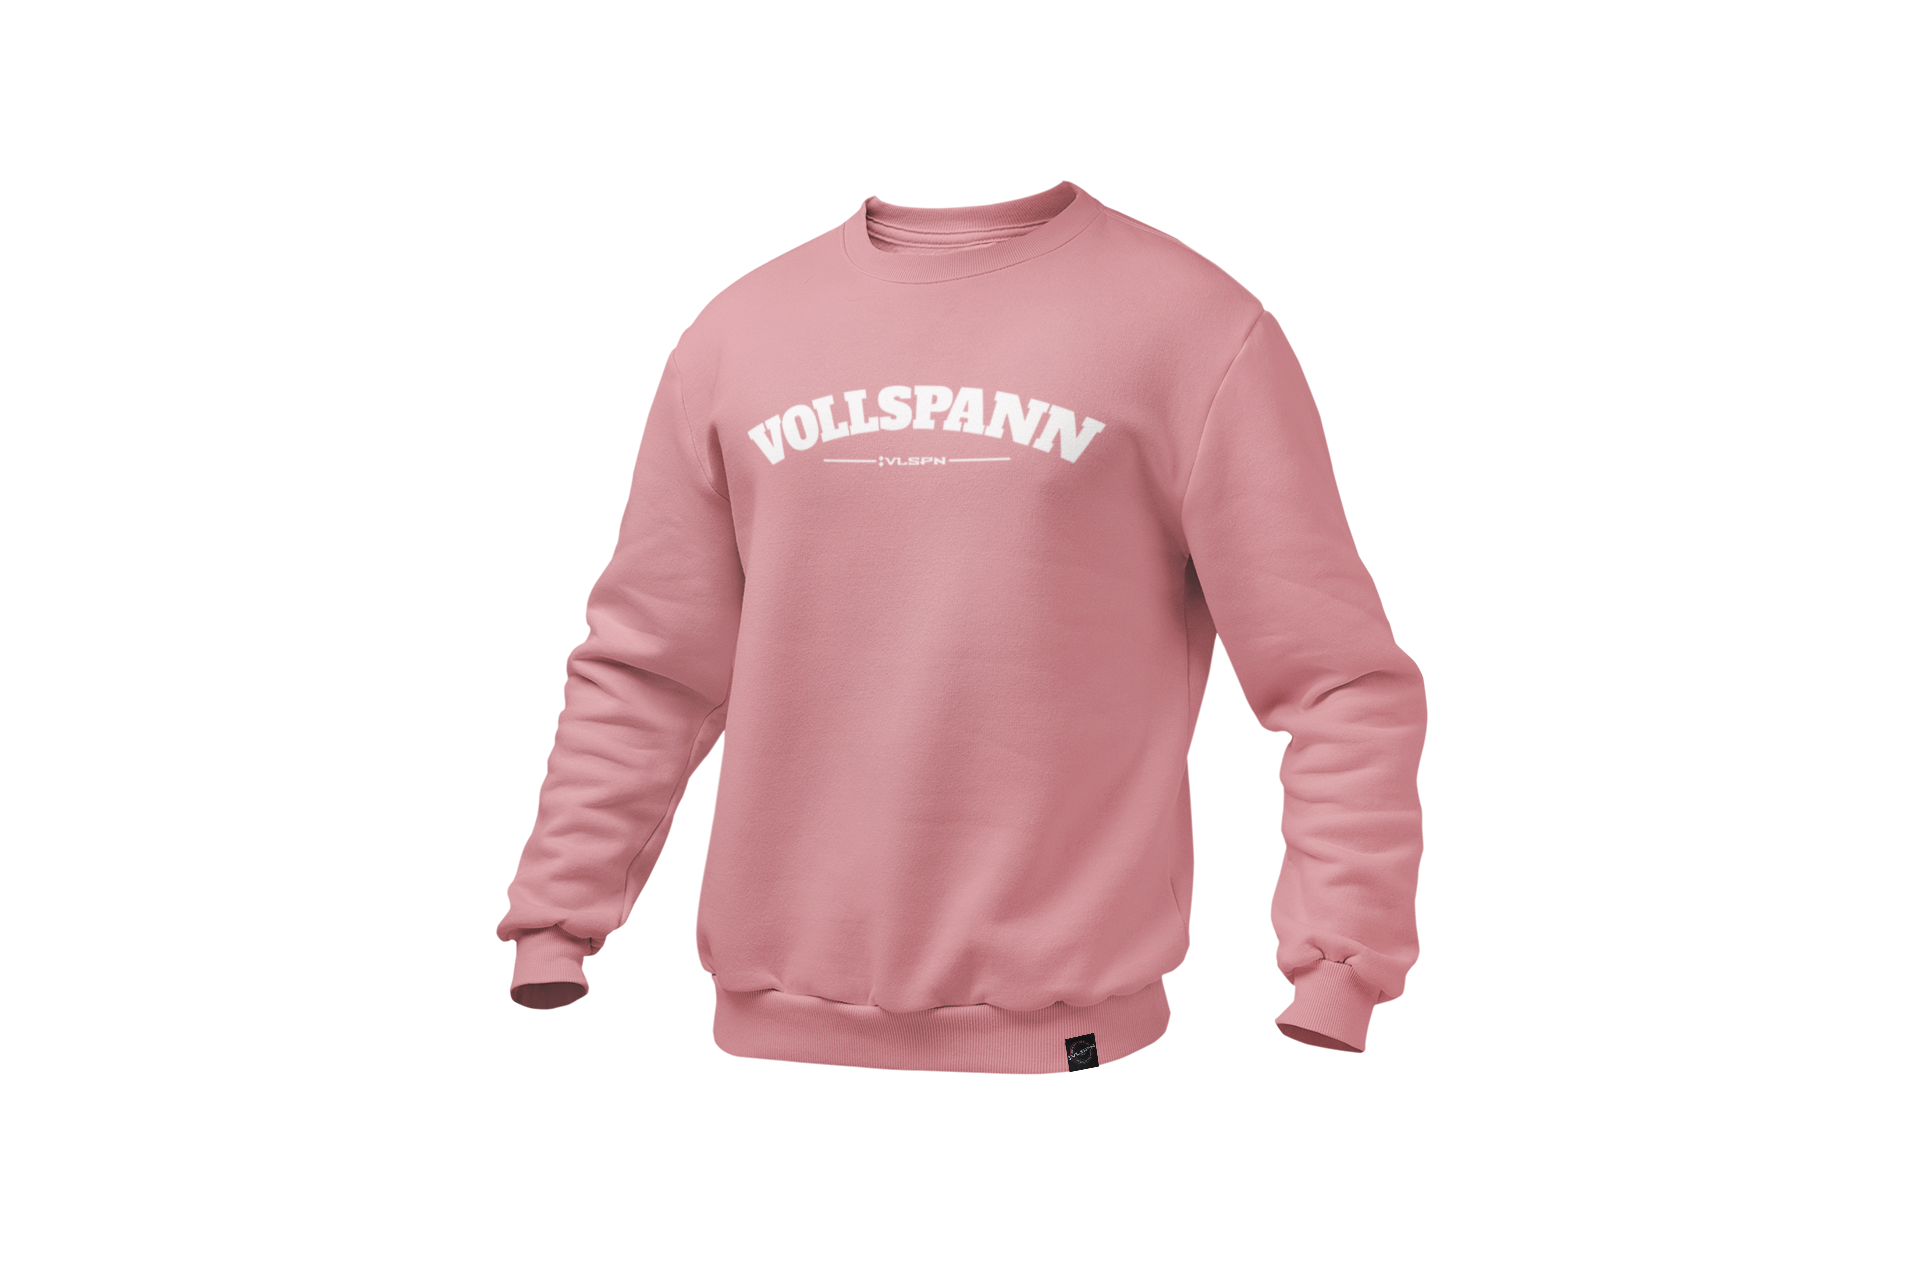 mockup-of-a-ghosted-crewneck-sweatshirt-over-a-solid-background-26960 (61).png